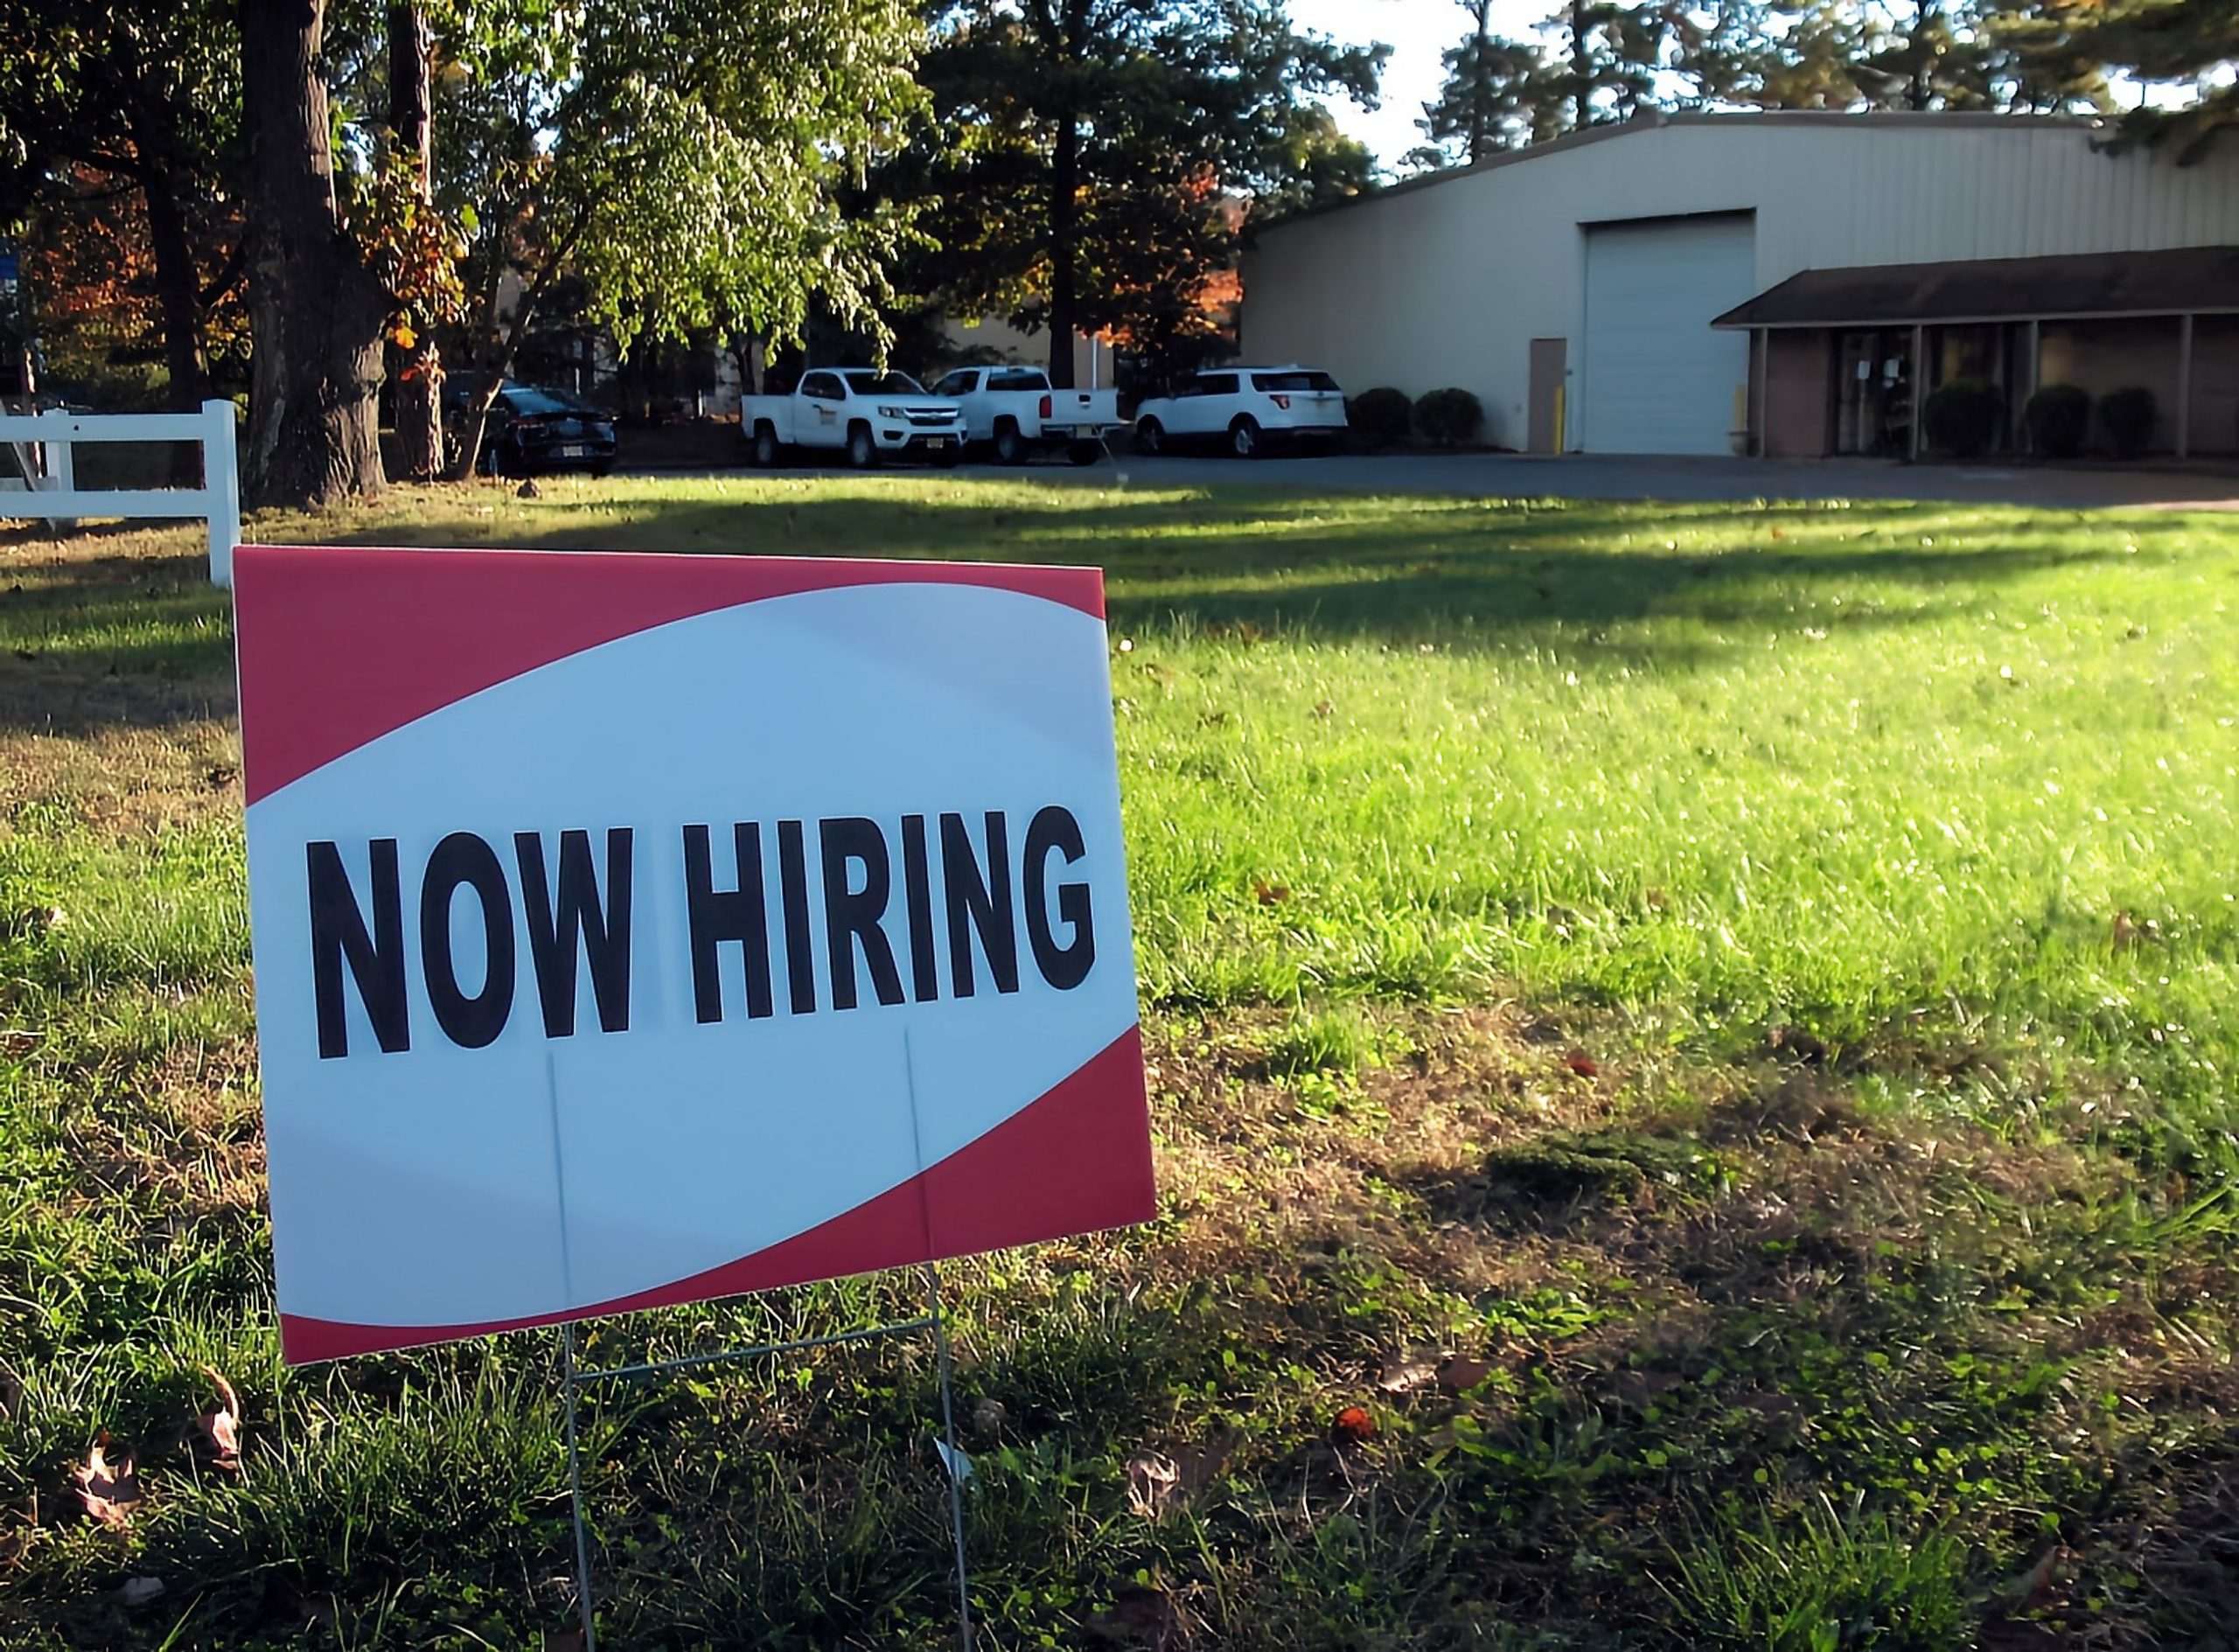 US adds 263,000 jobs in September, unemployment rate falls to 3.5%